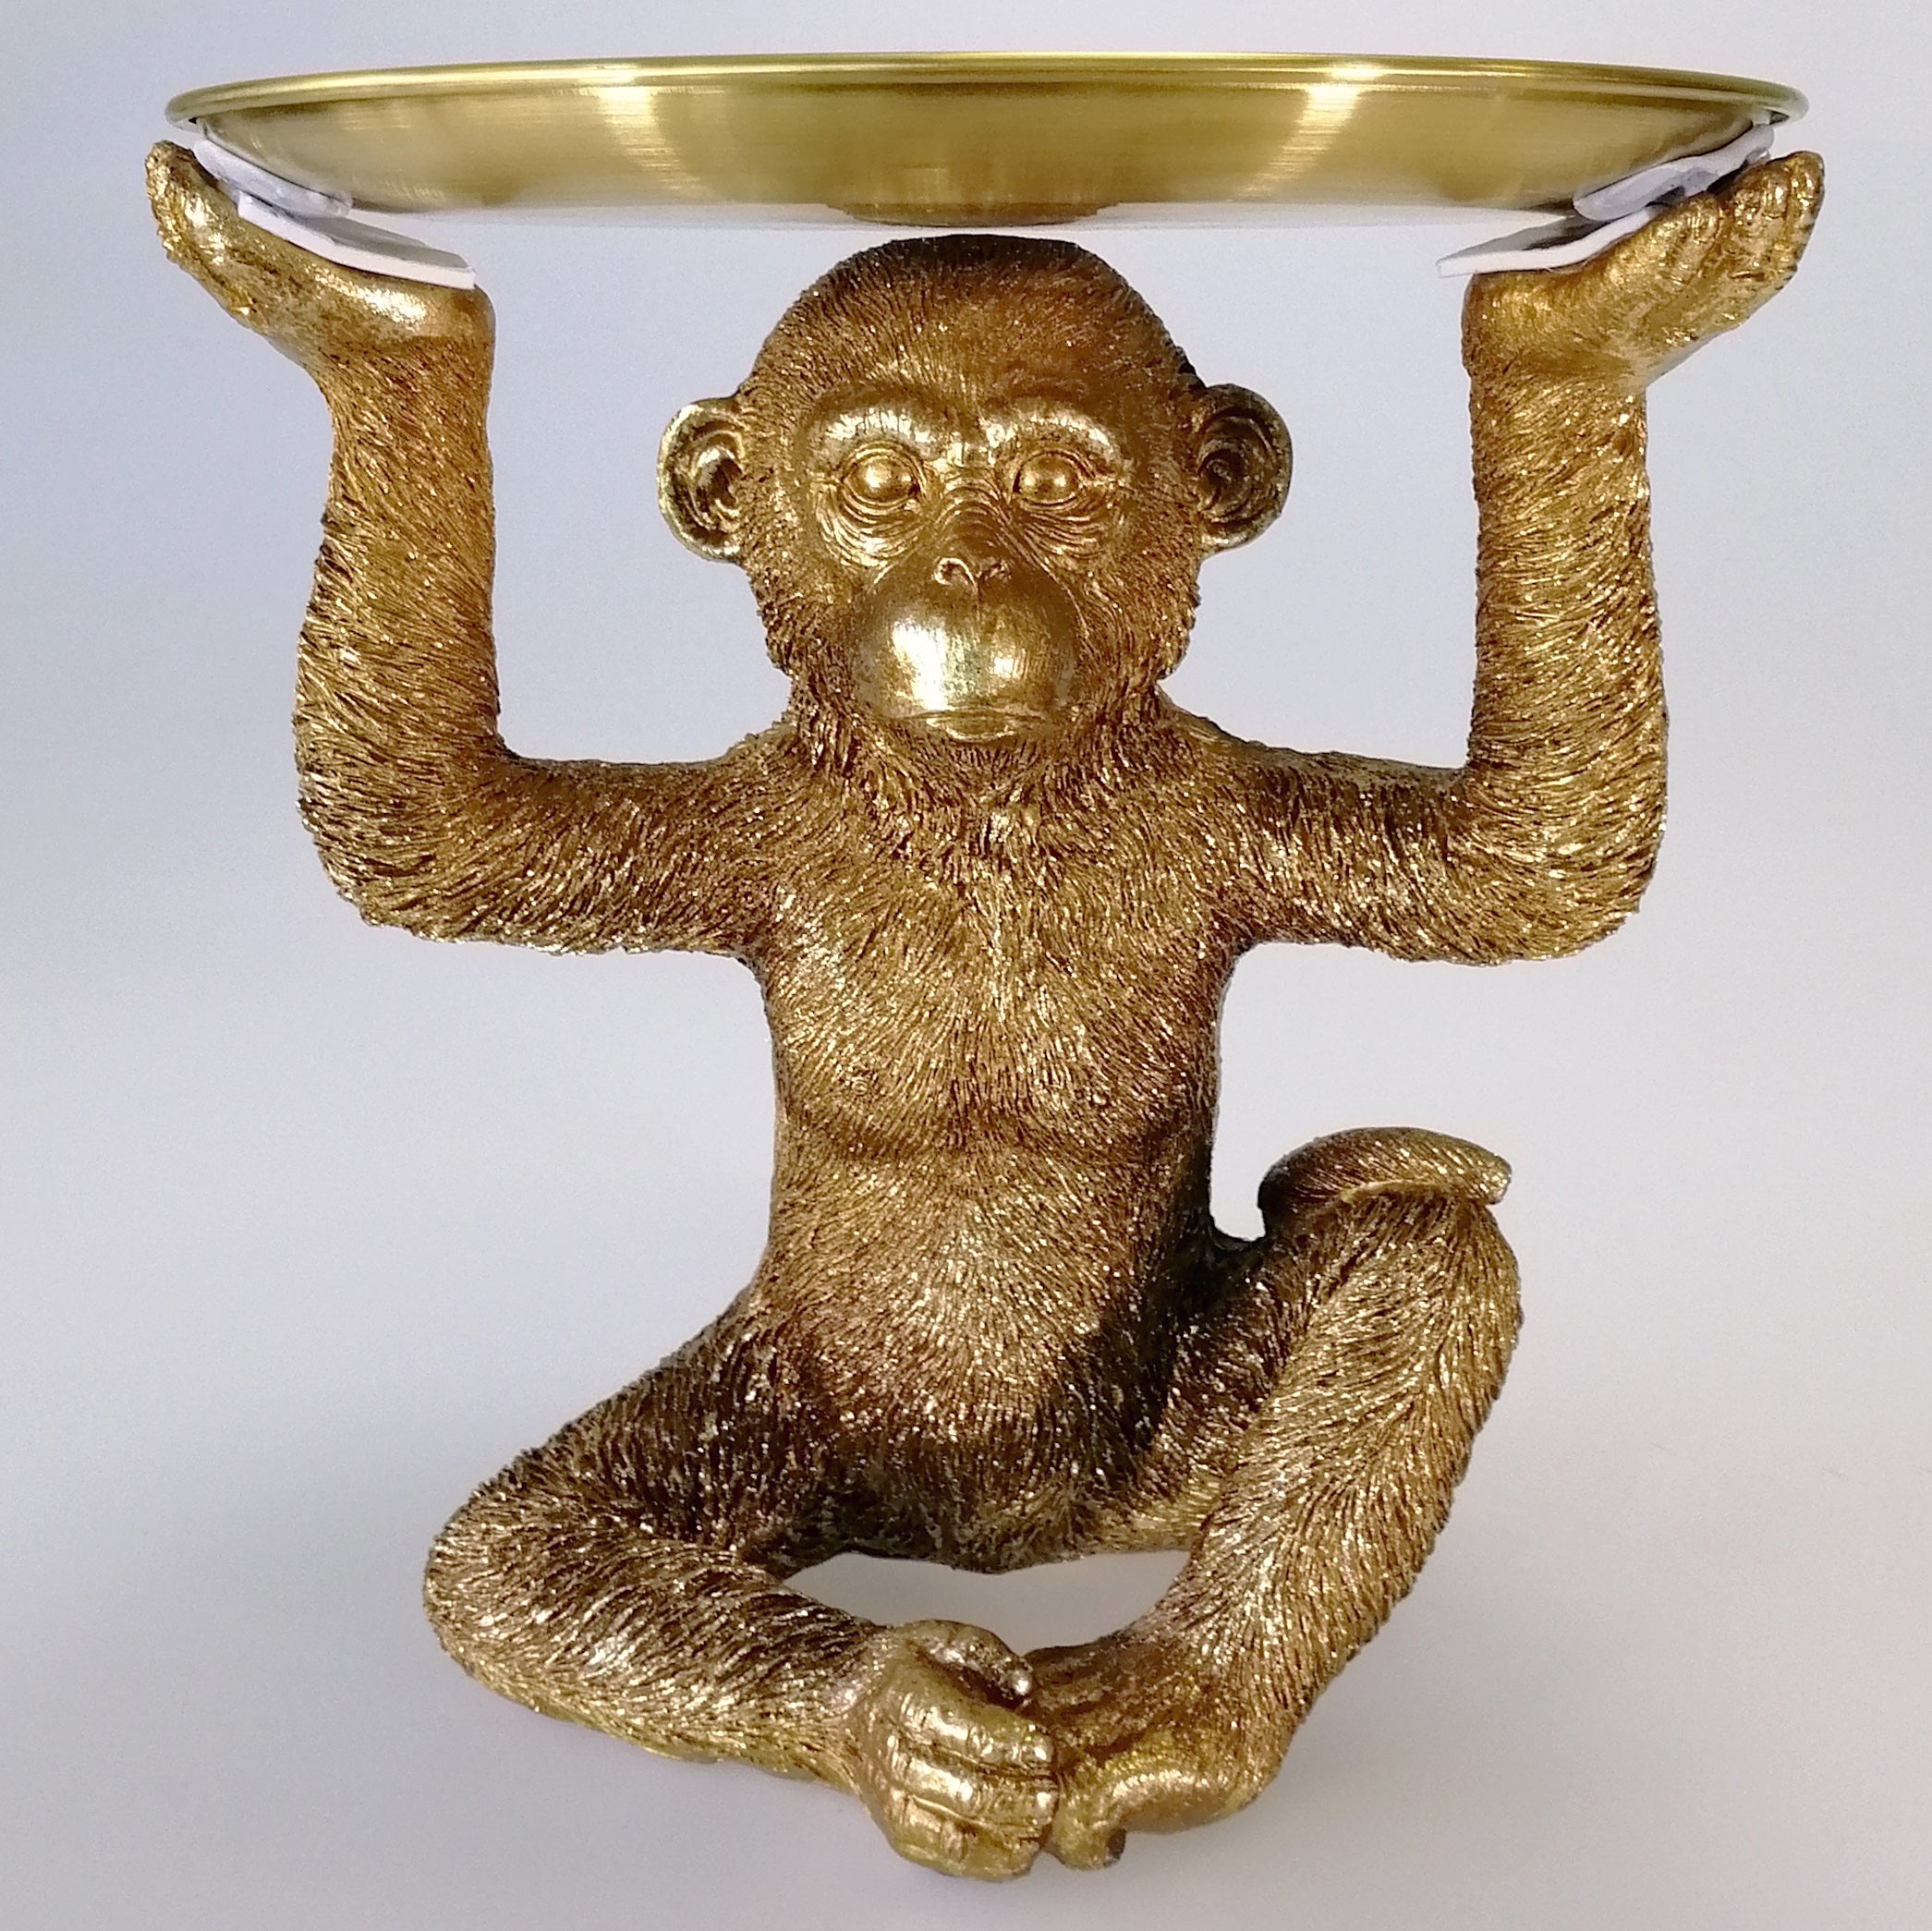 Painted Gold Monkey & Gold Tray